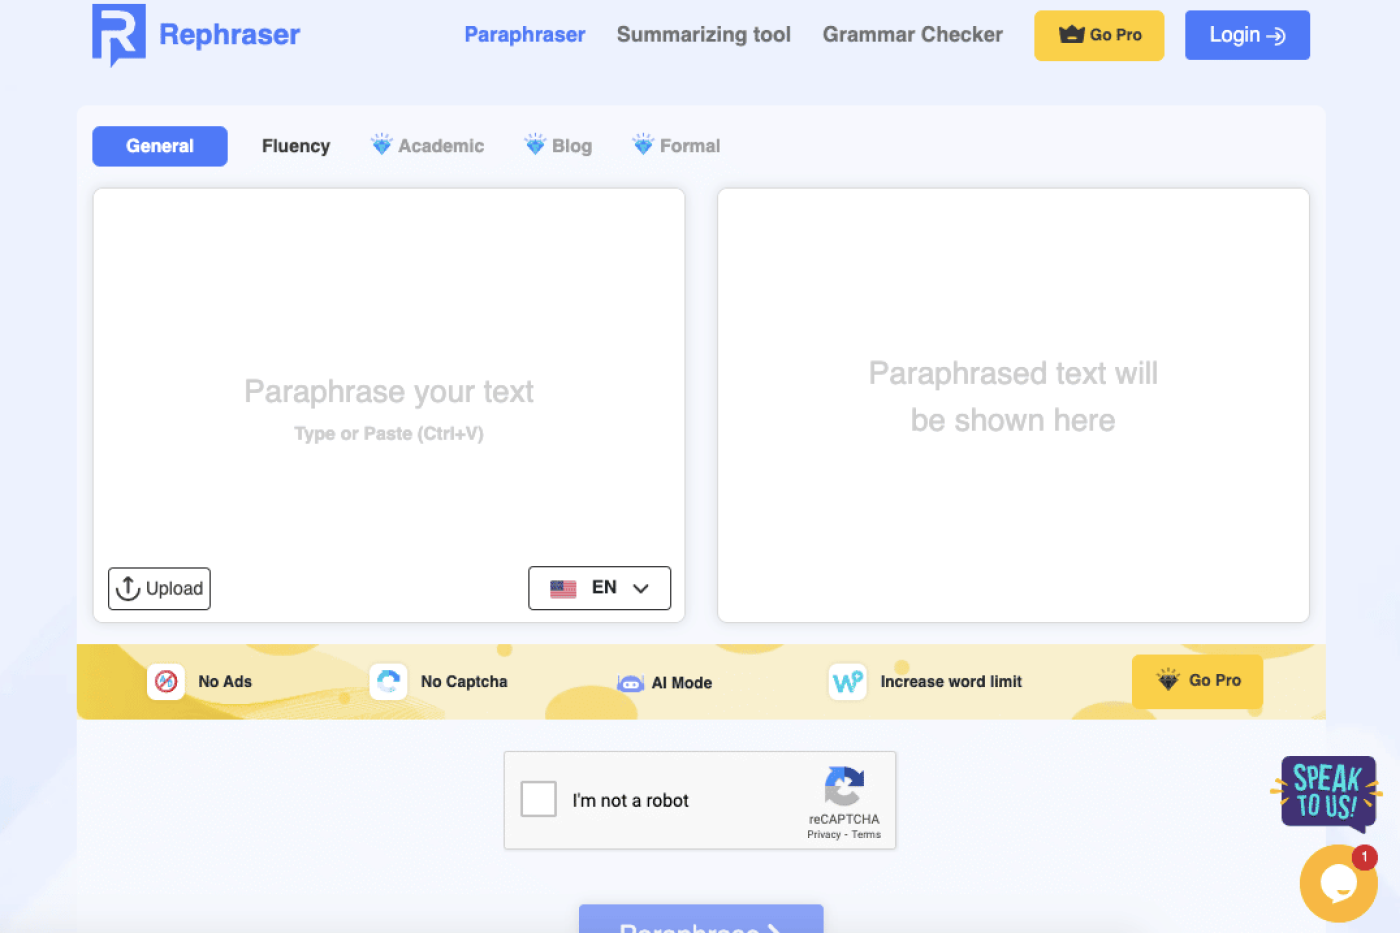 Rephraser Co Review 2023: Details, Pricing, And Features